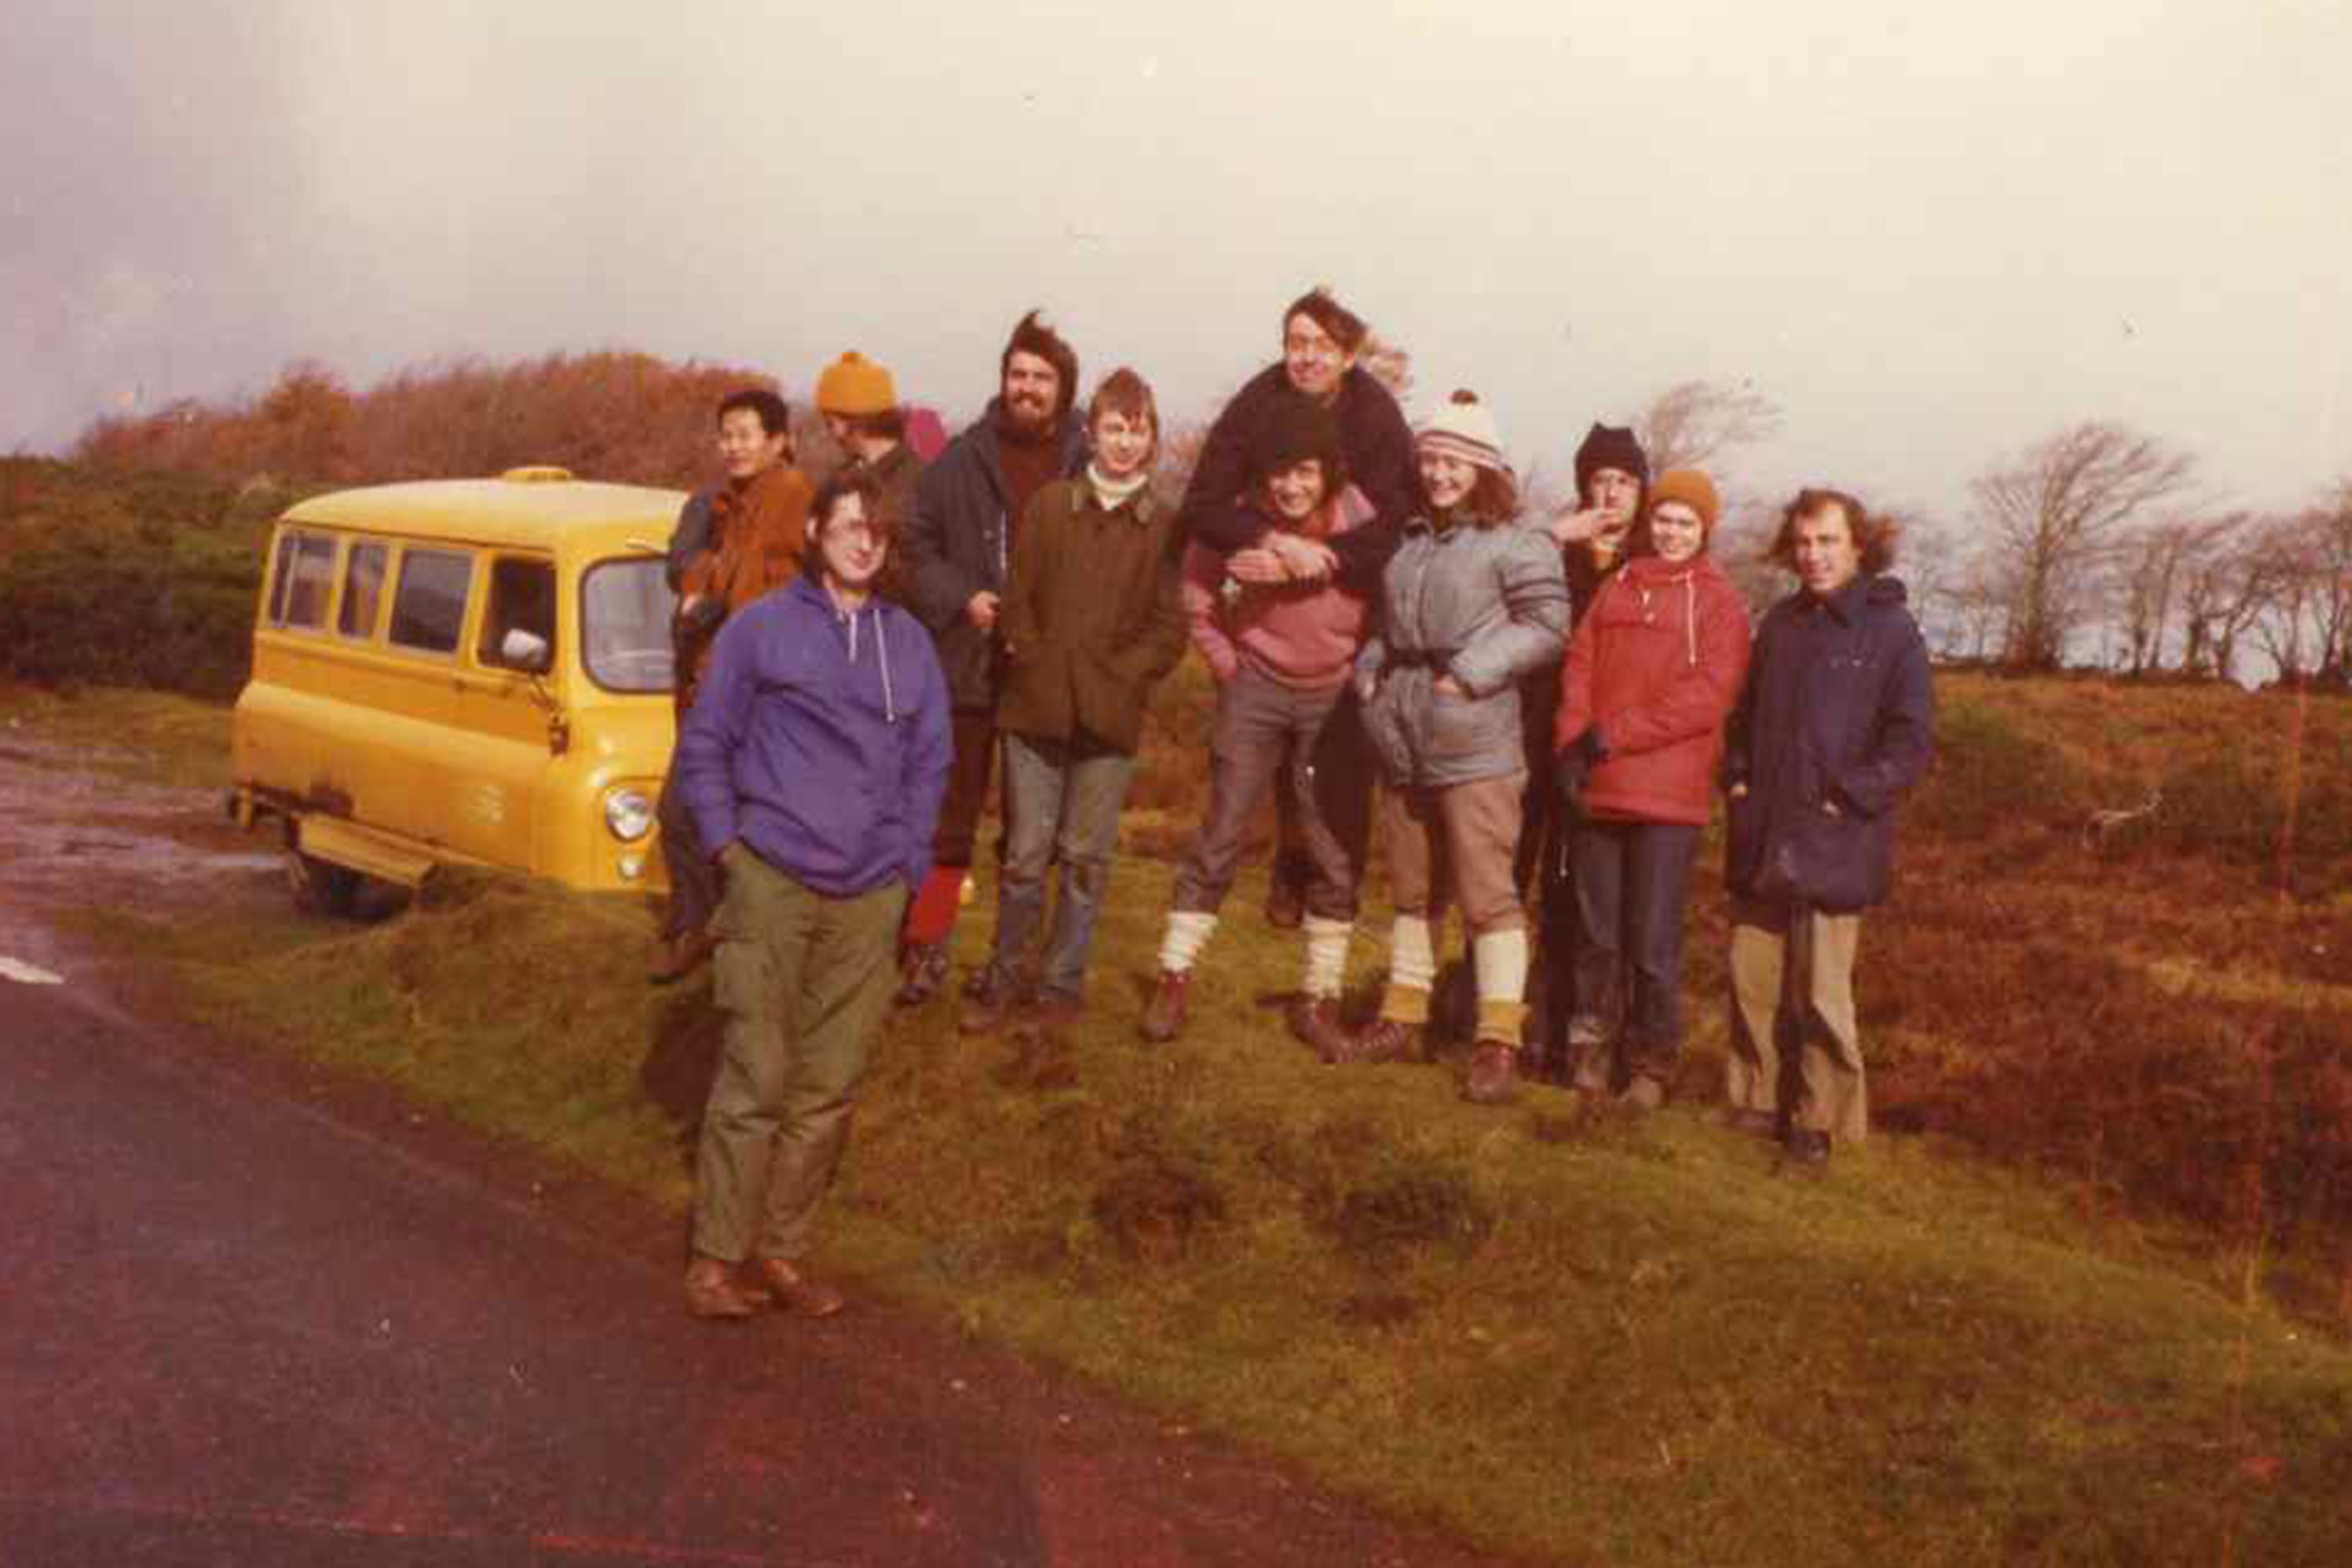 Silwood Camping trip in the ‘Yellow Peril’